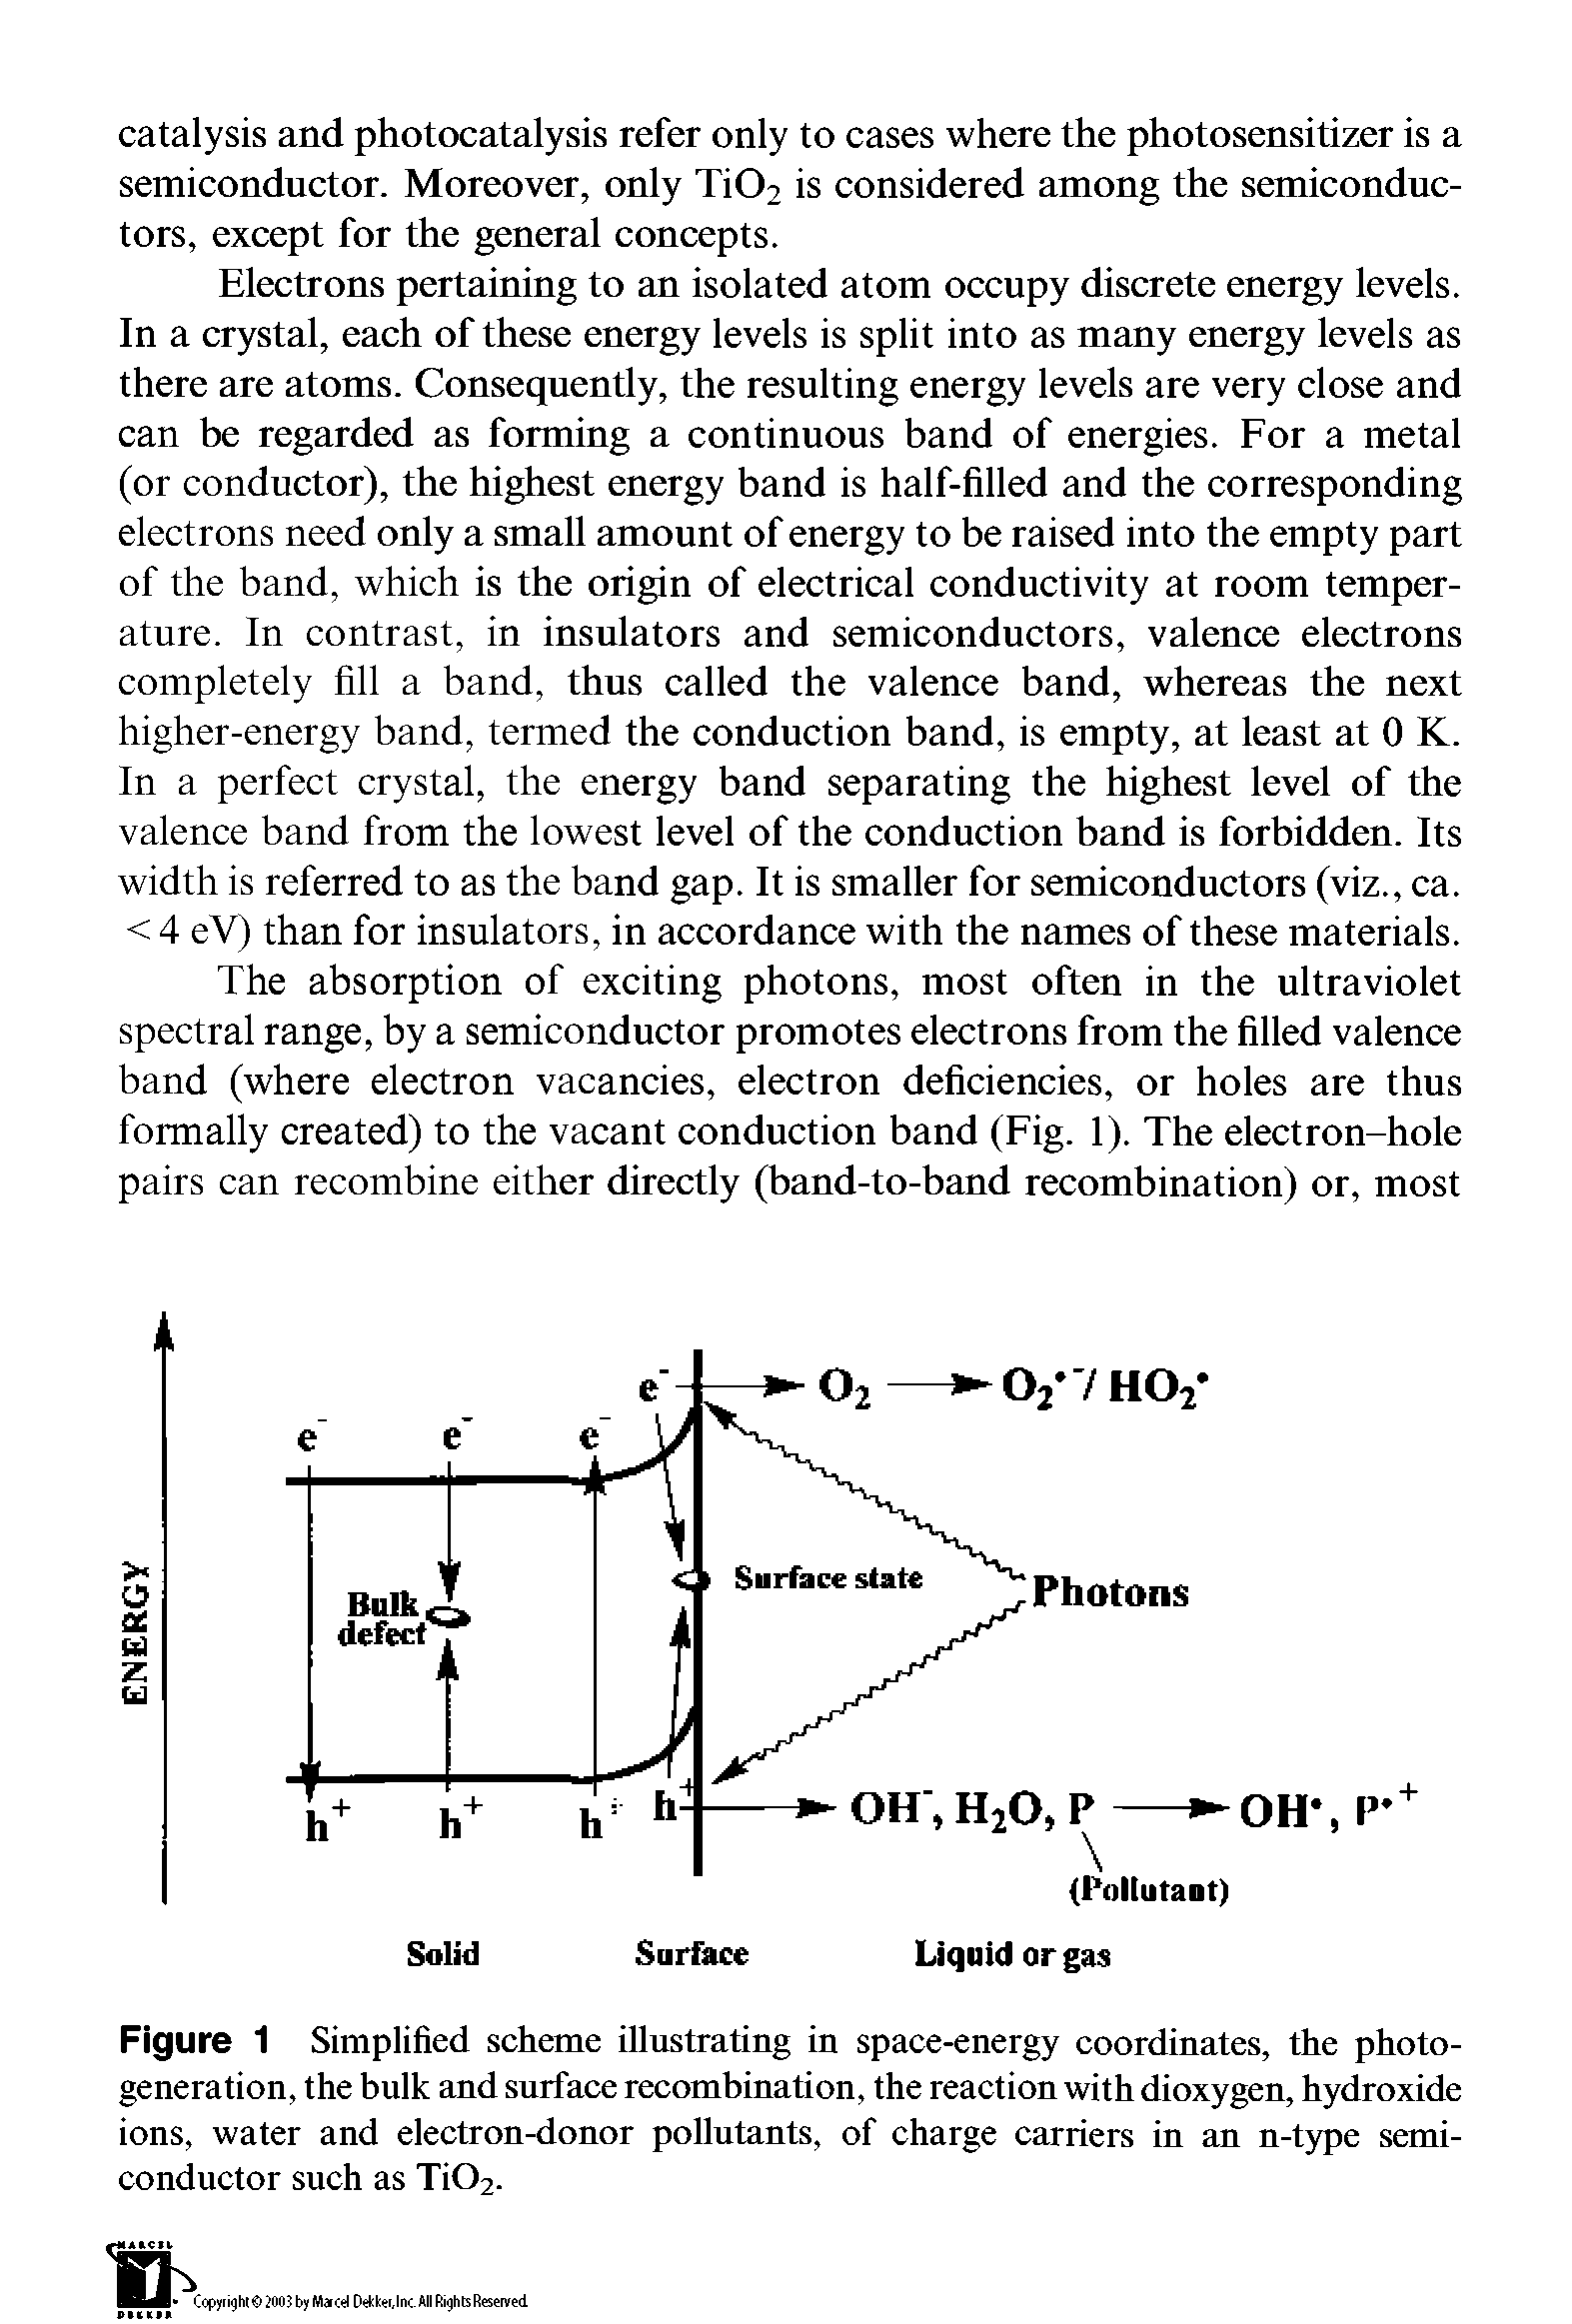 Figure 1 Simplified scheme illustrating in space-energy coordinates, the photogeneration, the bulk and surface recombination, the reaction with dioxygen, hydroxide ions, water and electron-donor pollutants, of charge carriers in an n-type semiconductor such as Ti02.